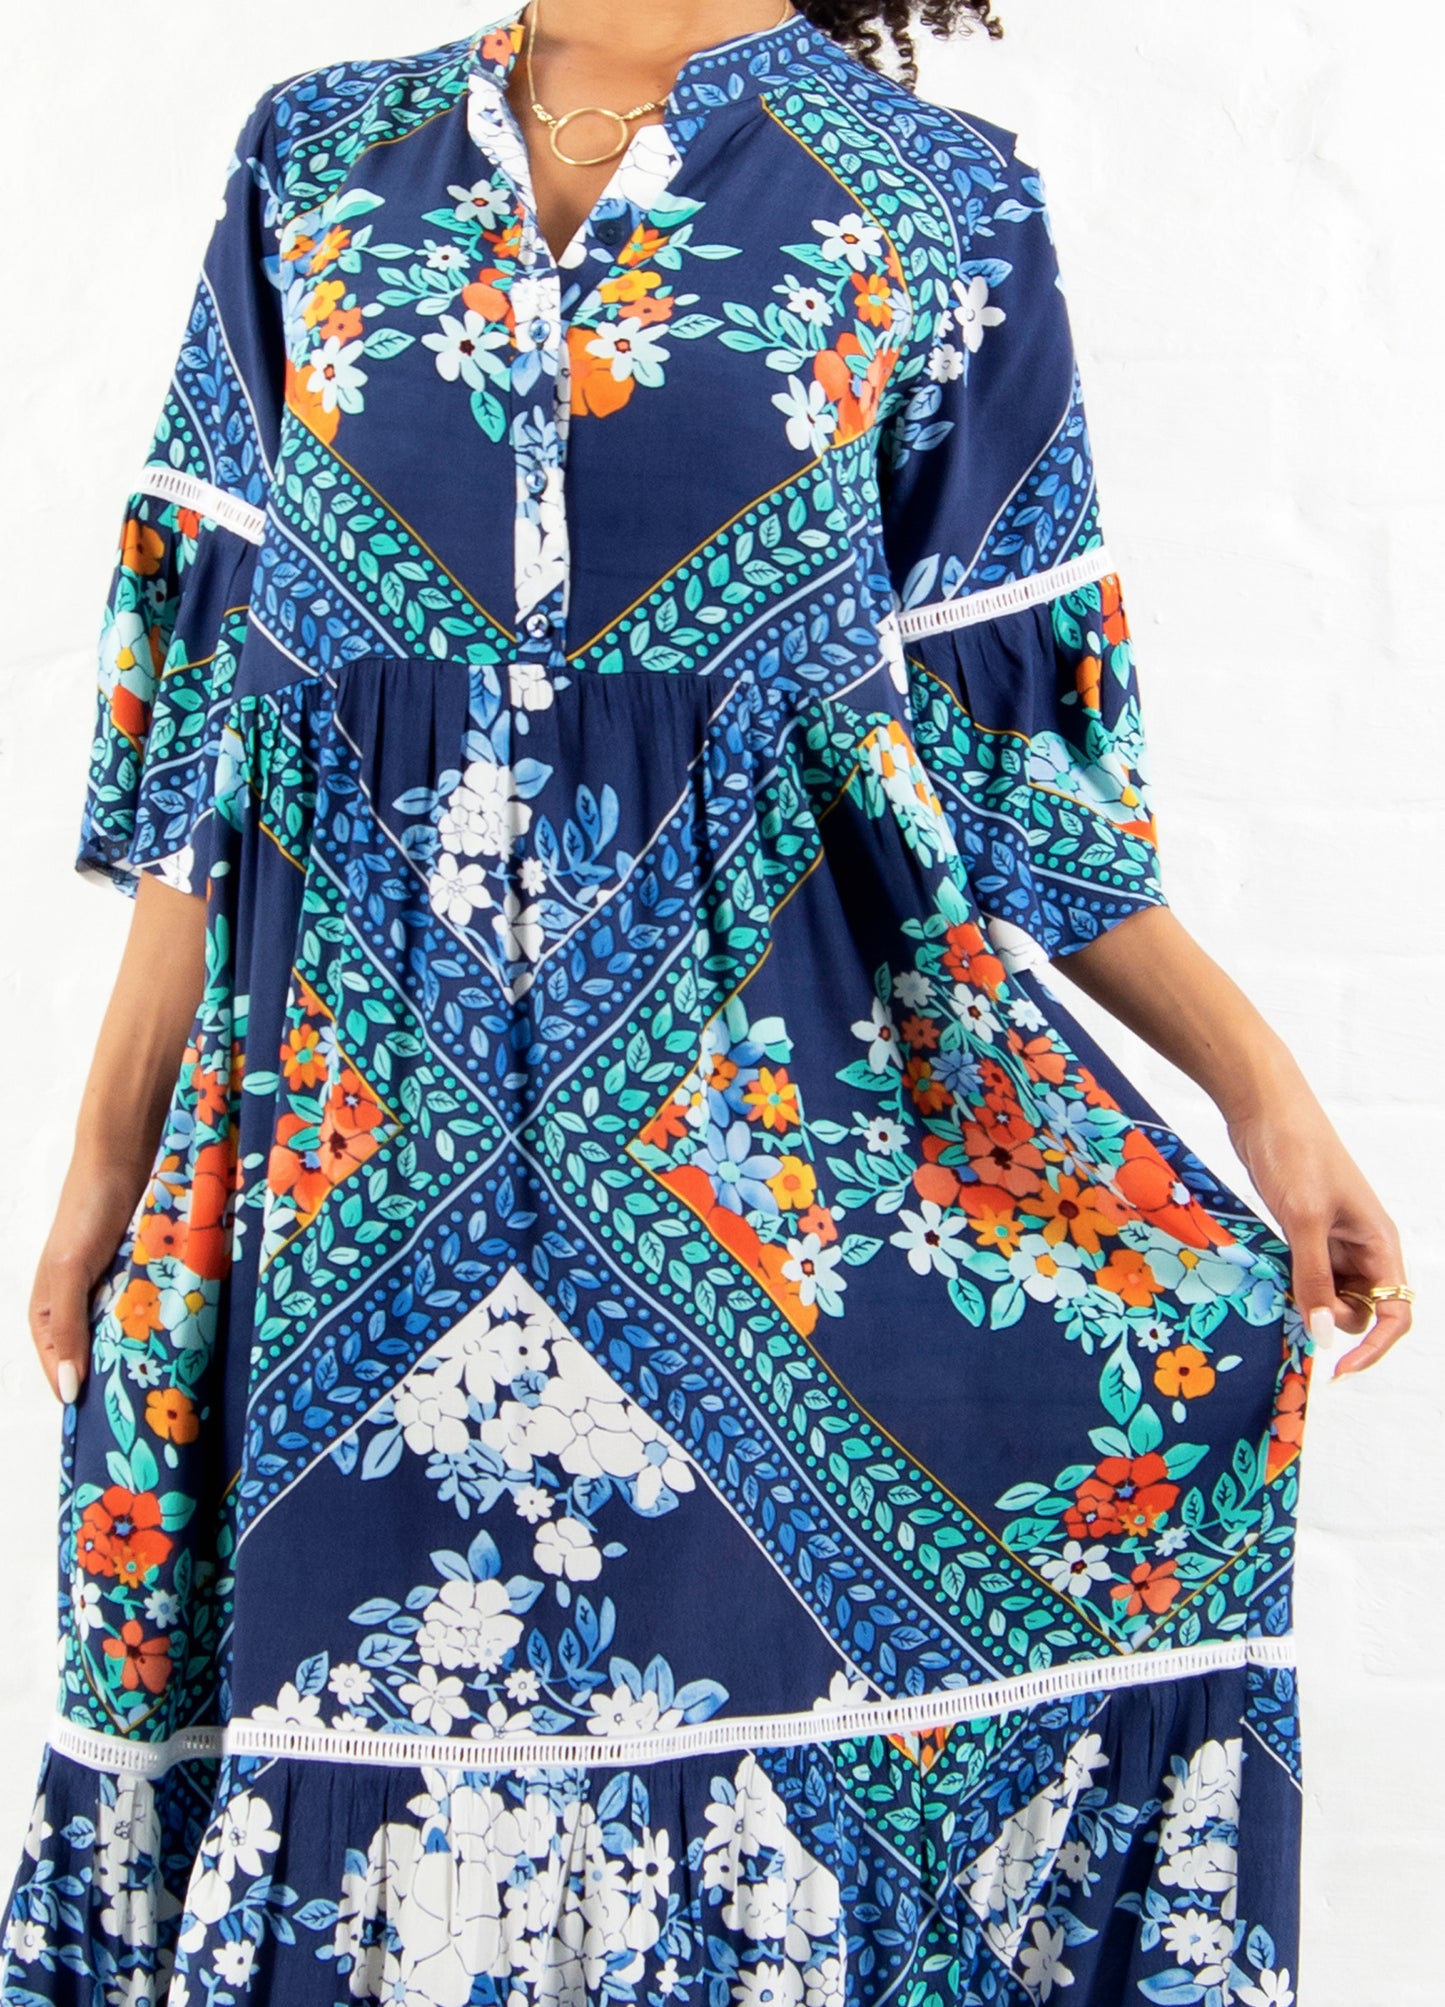 Cora maxi tiered dress in navy Aloha Floral print